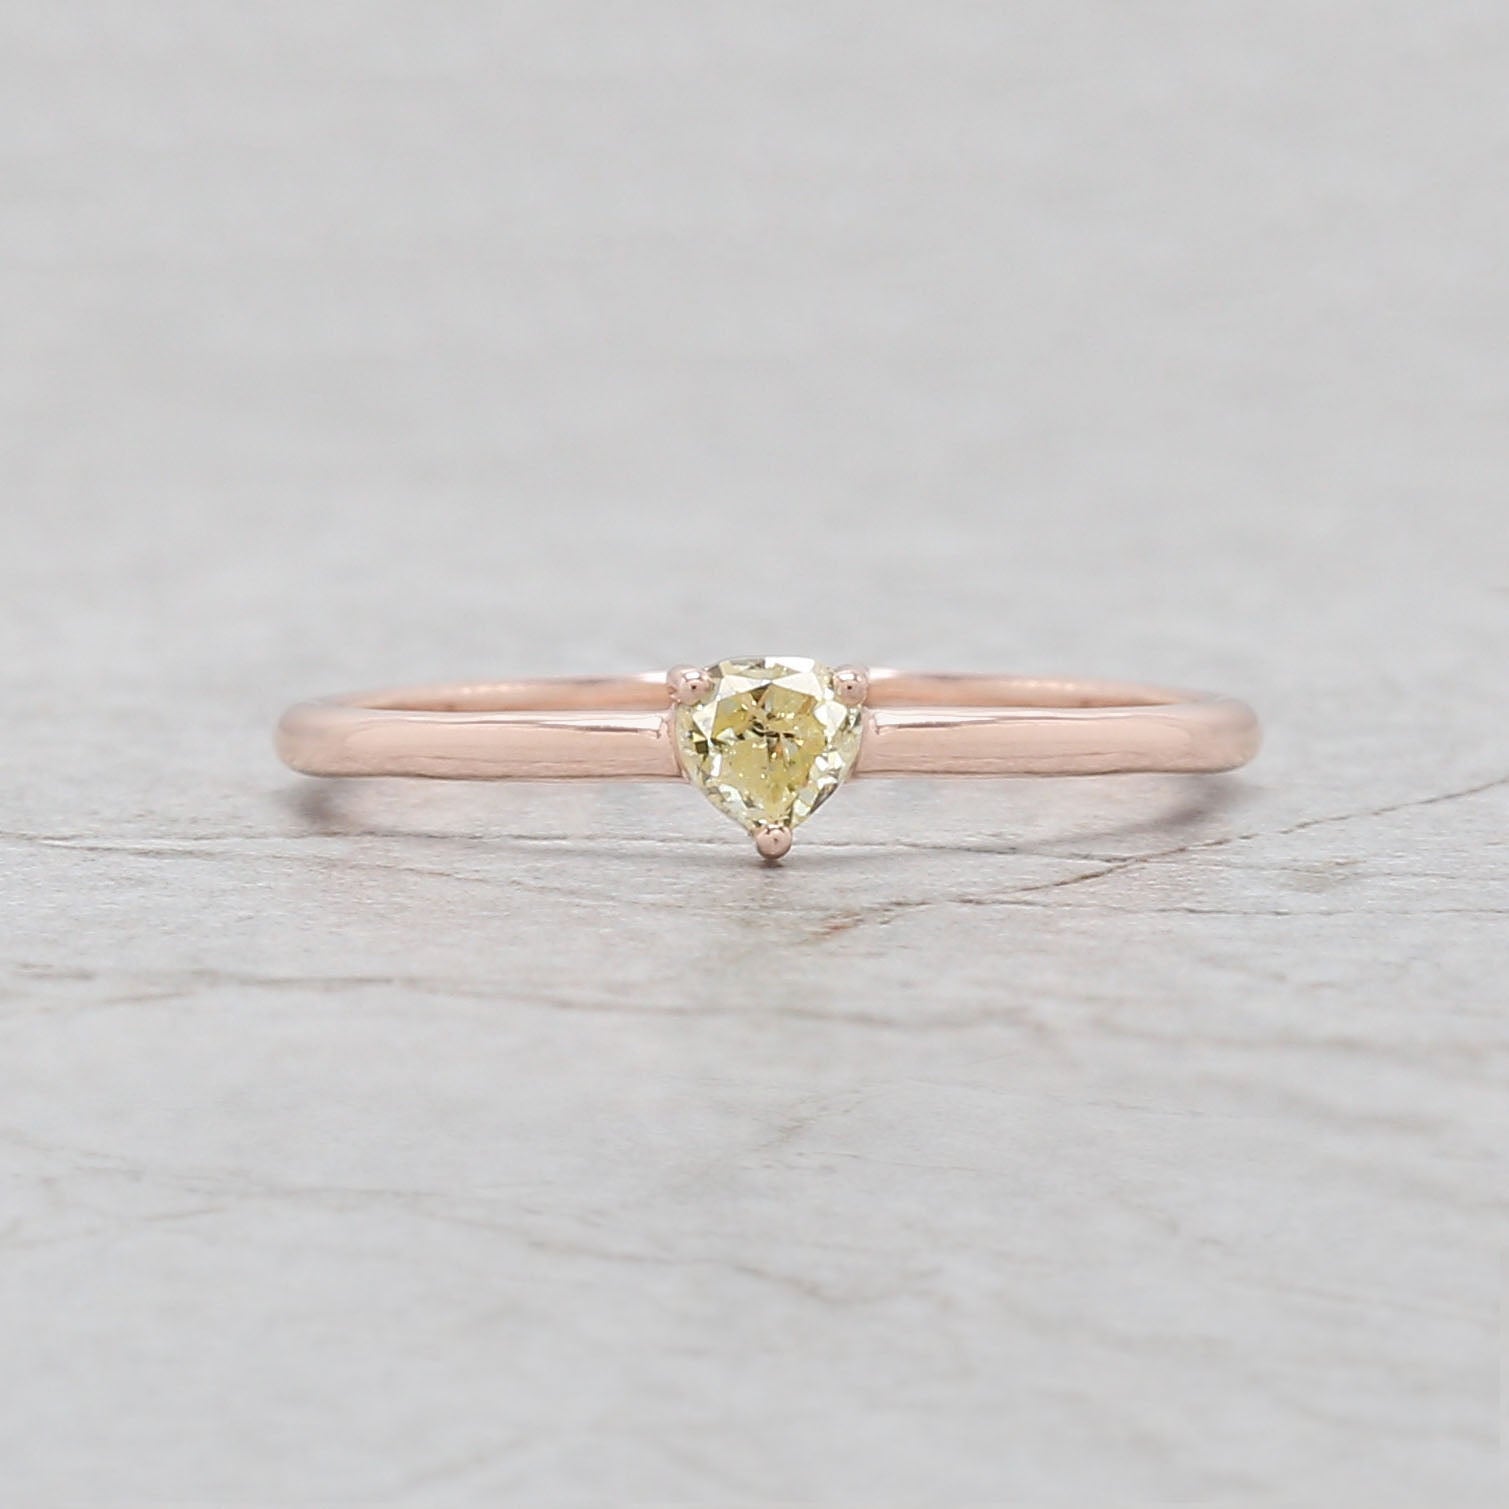 Heart Yellow Color Diamond Ring Engagement Wedding Gift Ring 14K Solid Rose White Yellow Gold Ring 0.19 CT KDN8175